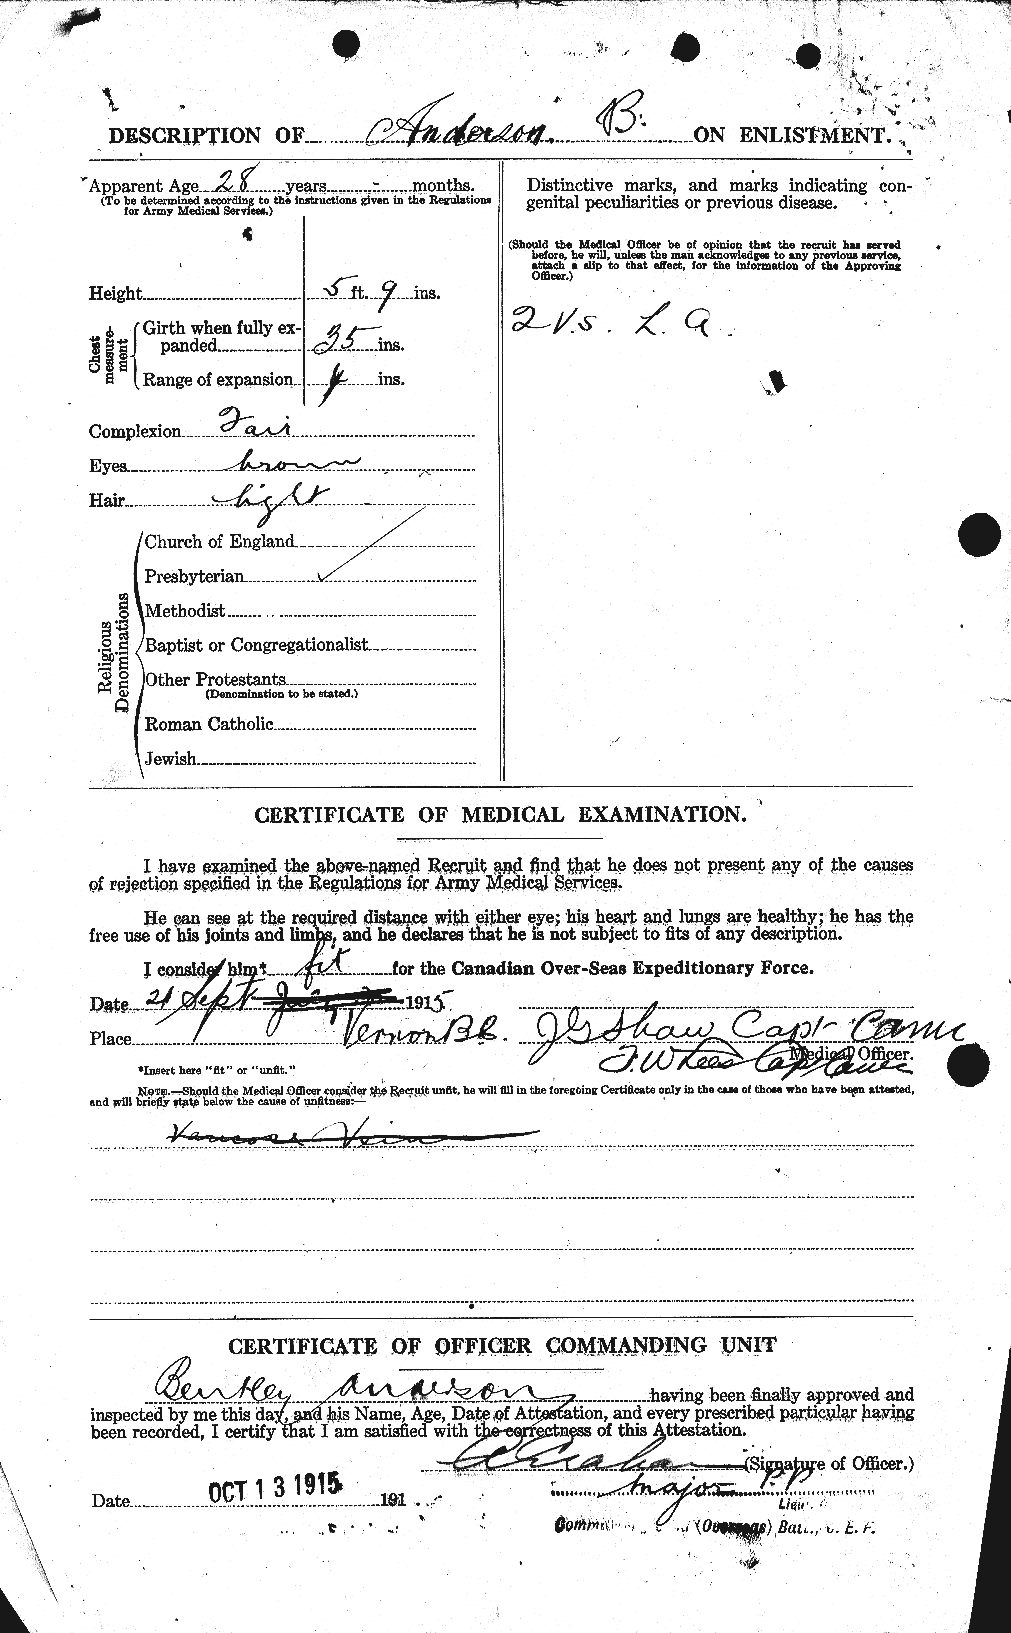 Personnel Records of the First World War - CEF 209319b